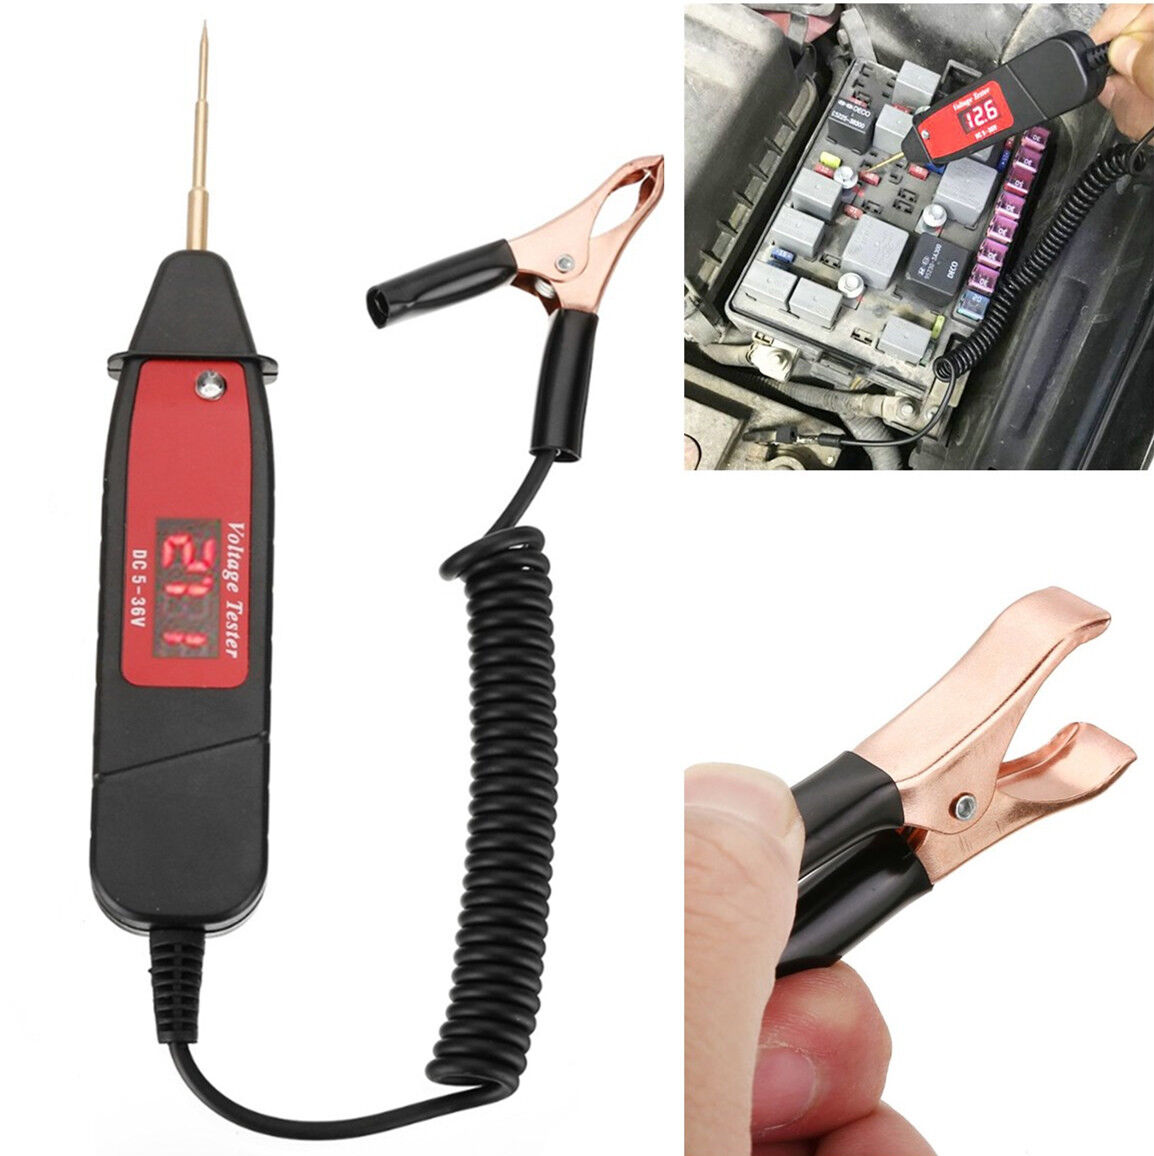 5-36V Digital Screen Car Electric Circuit Tester Copper Probe With ON OFF Switch